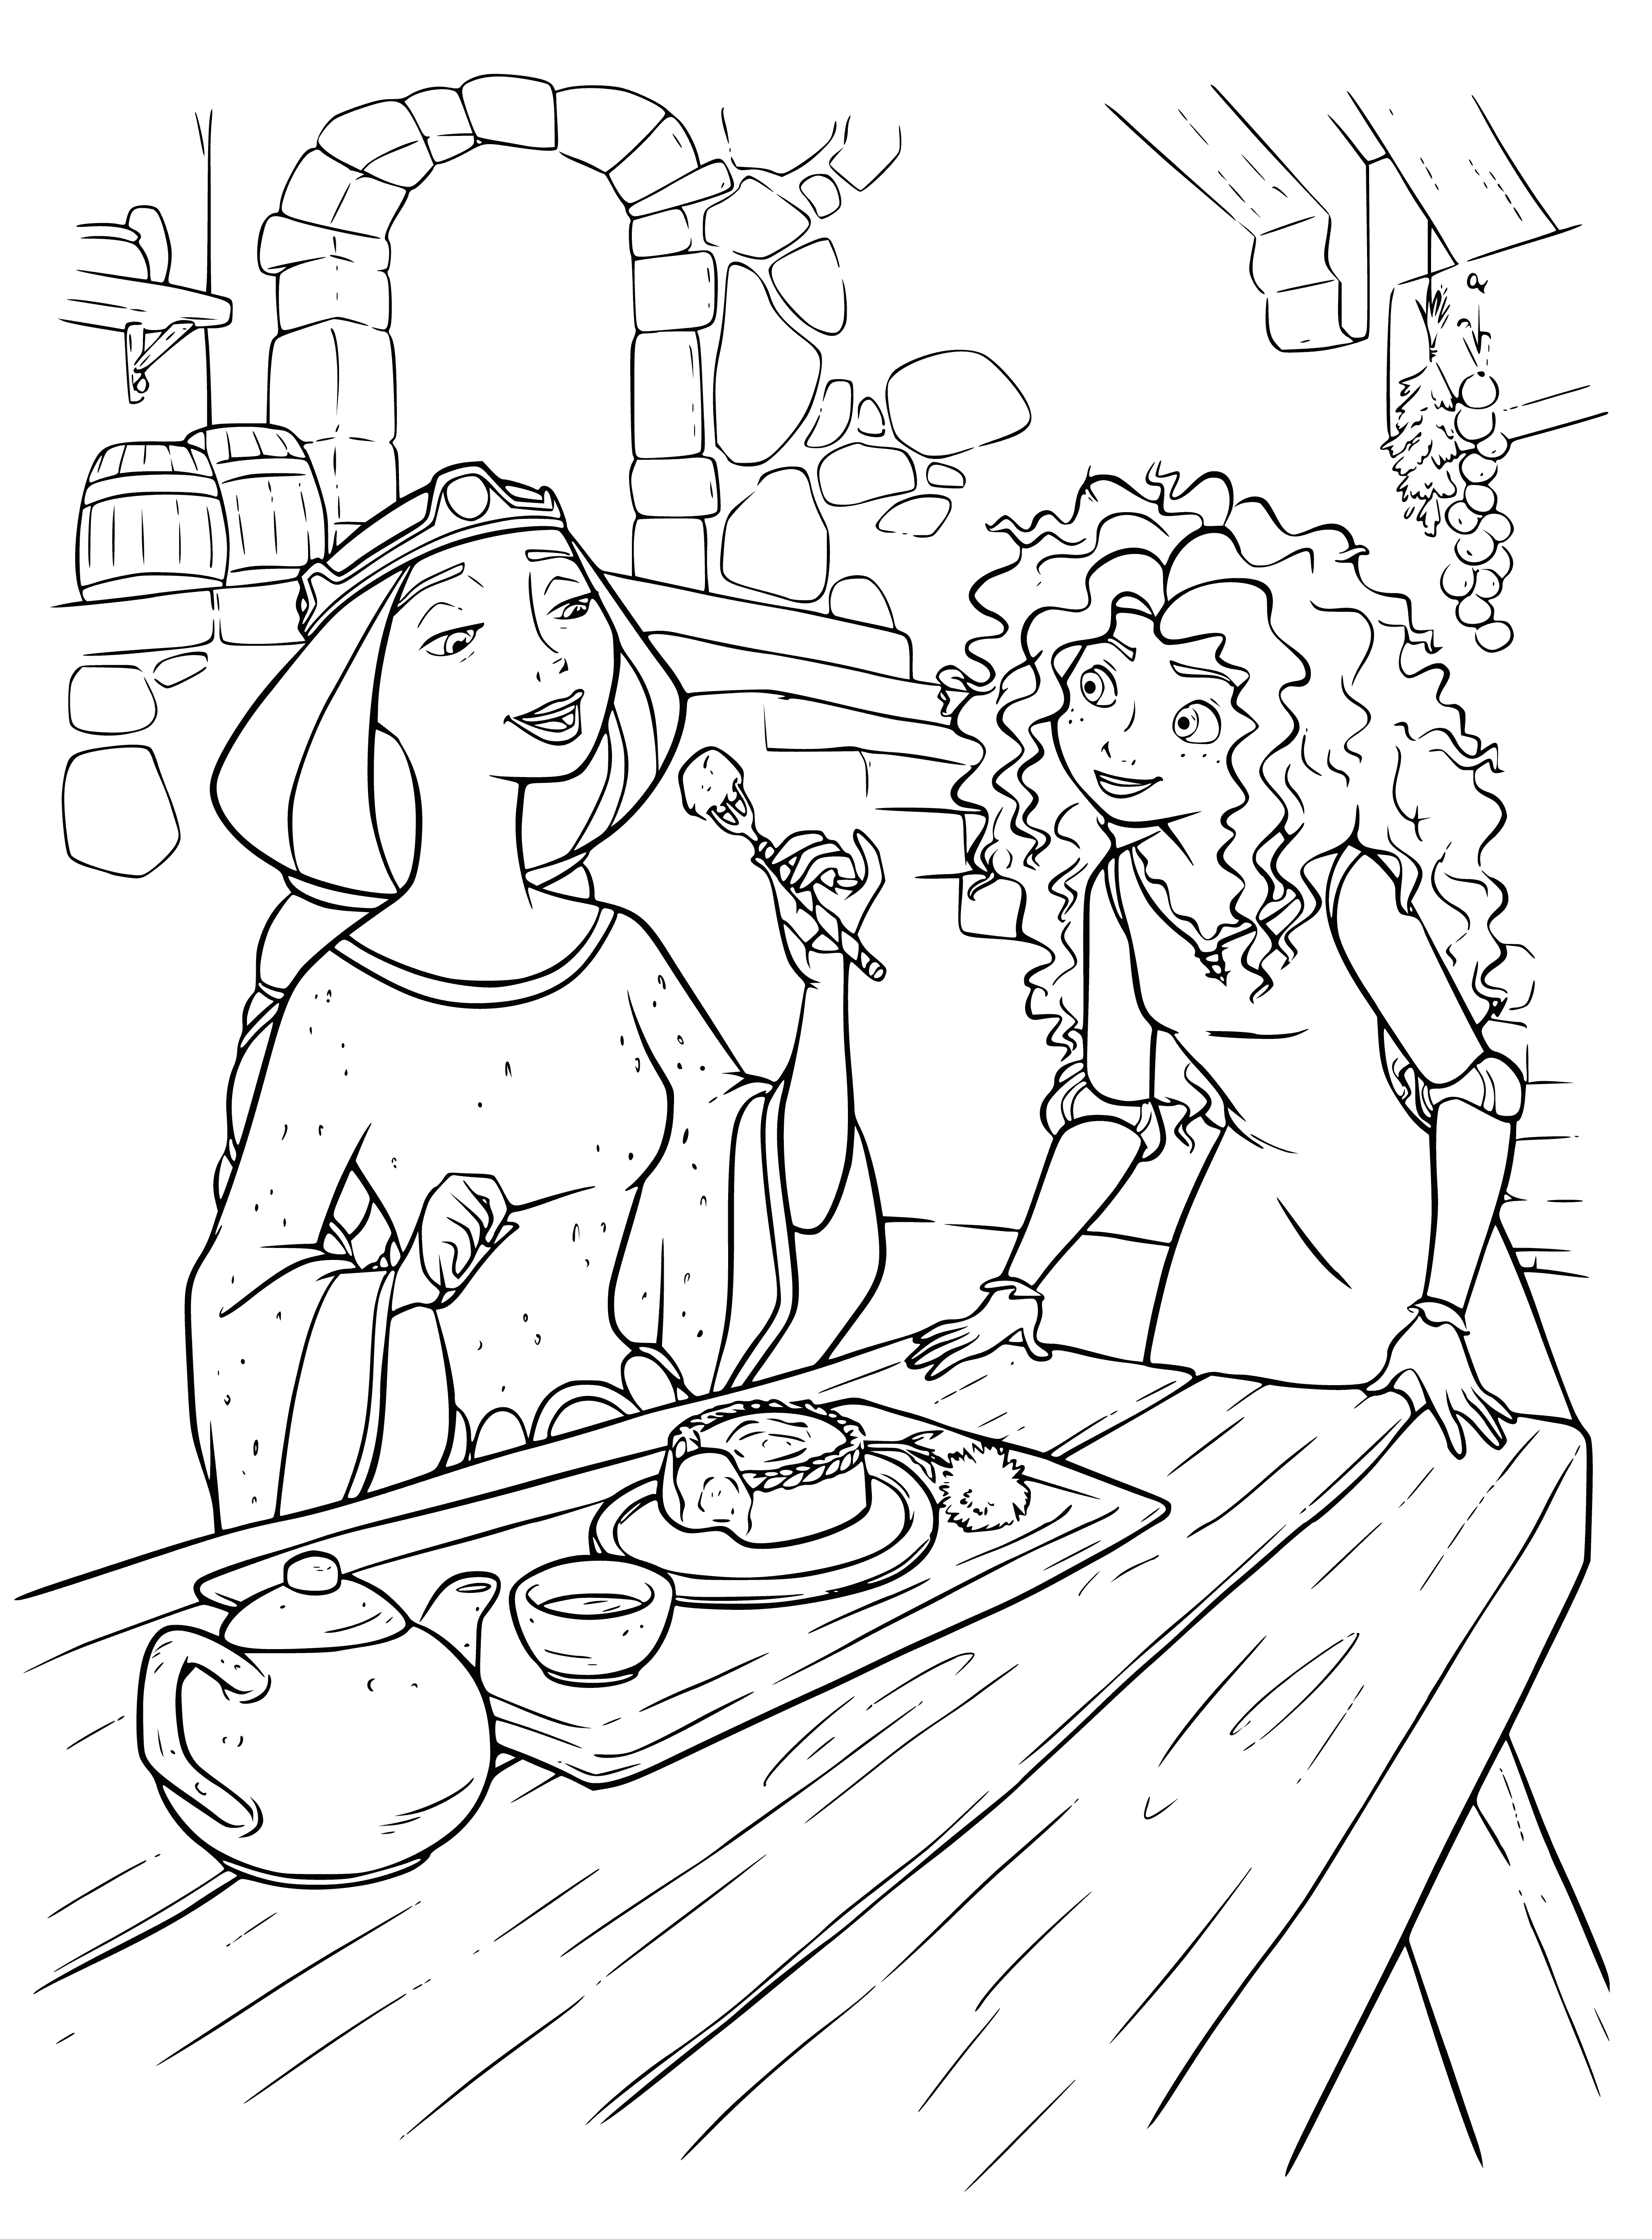 coloring page: Merida proudly presents a cake to her mom, smiling despite her mom's stern demeanor.